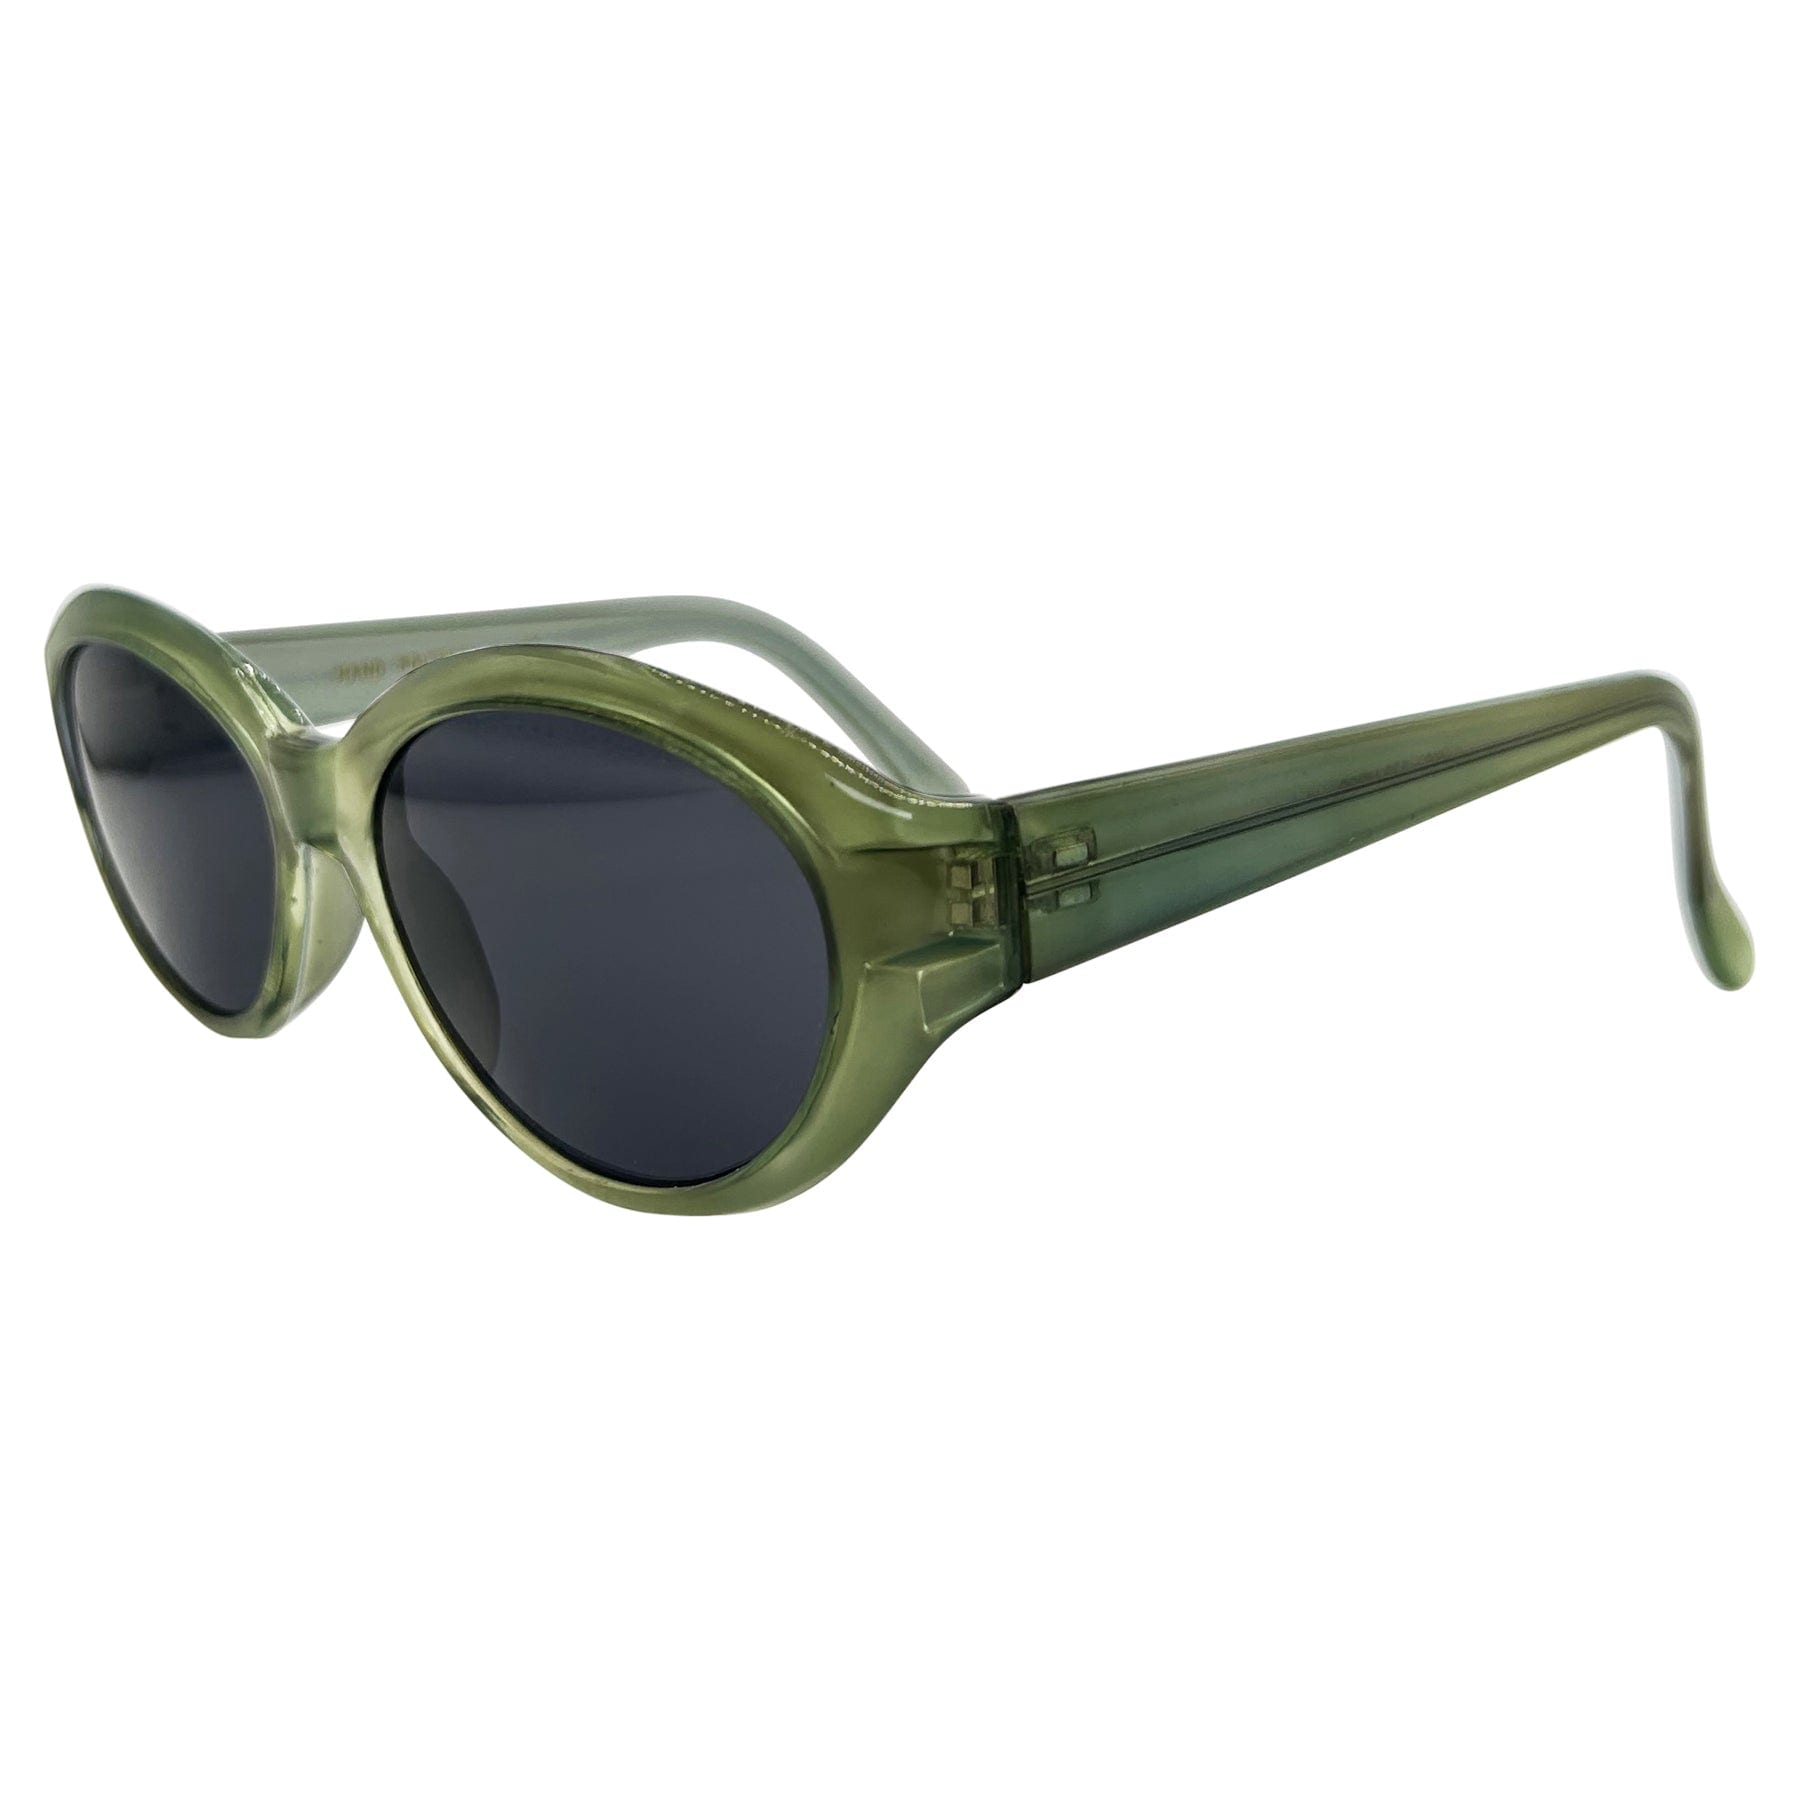 90s retro sunglasses with a cat eye shape and green jelly frame